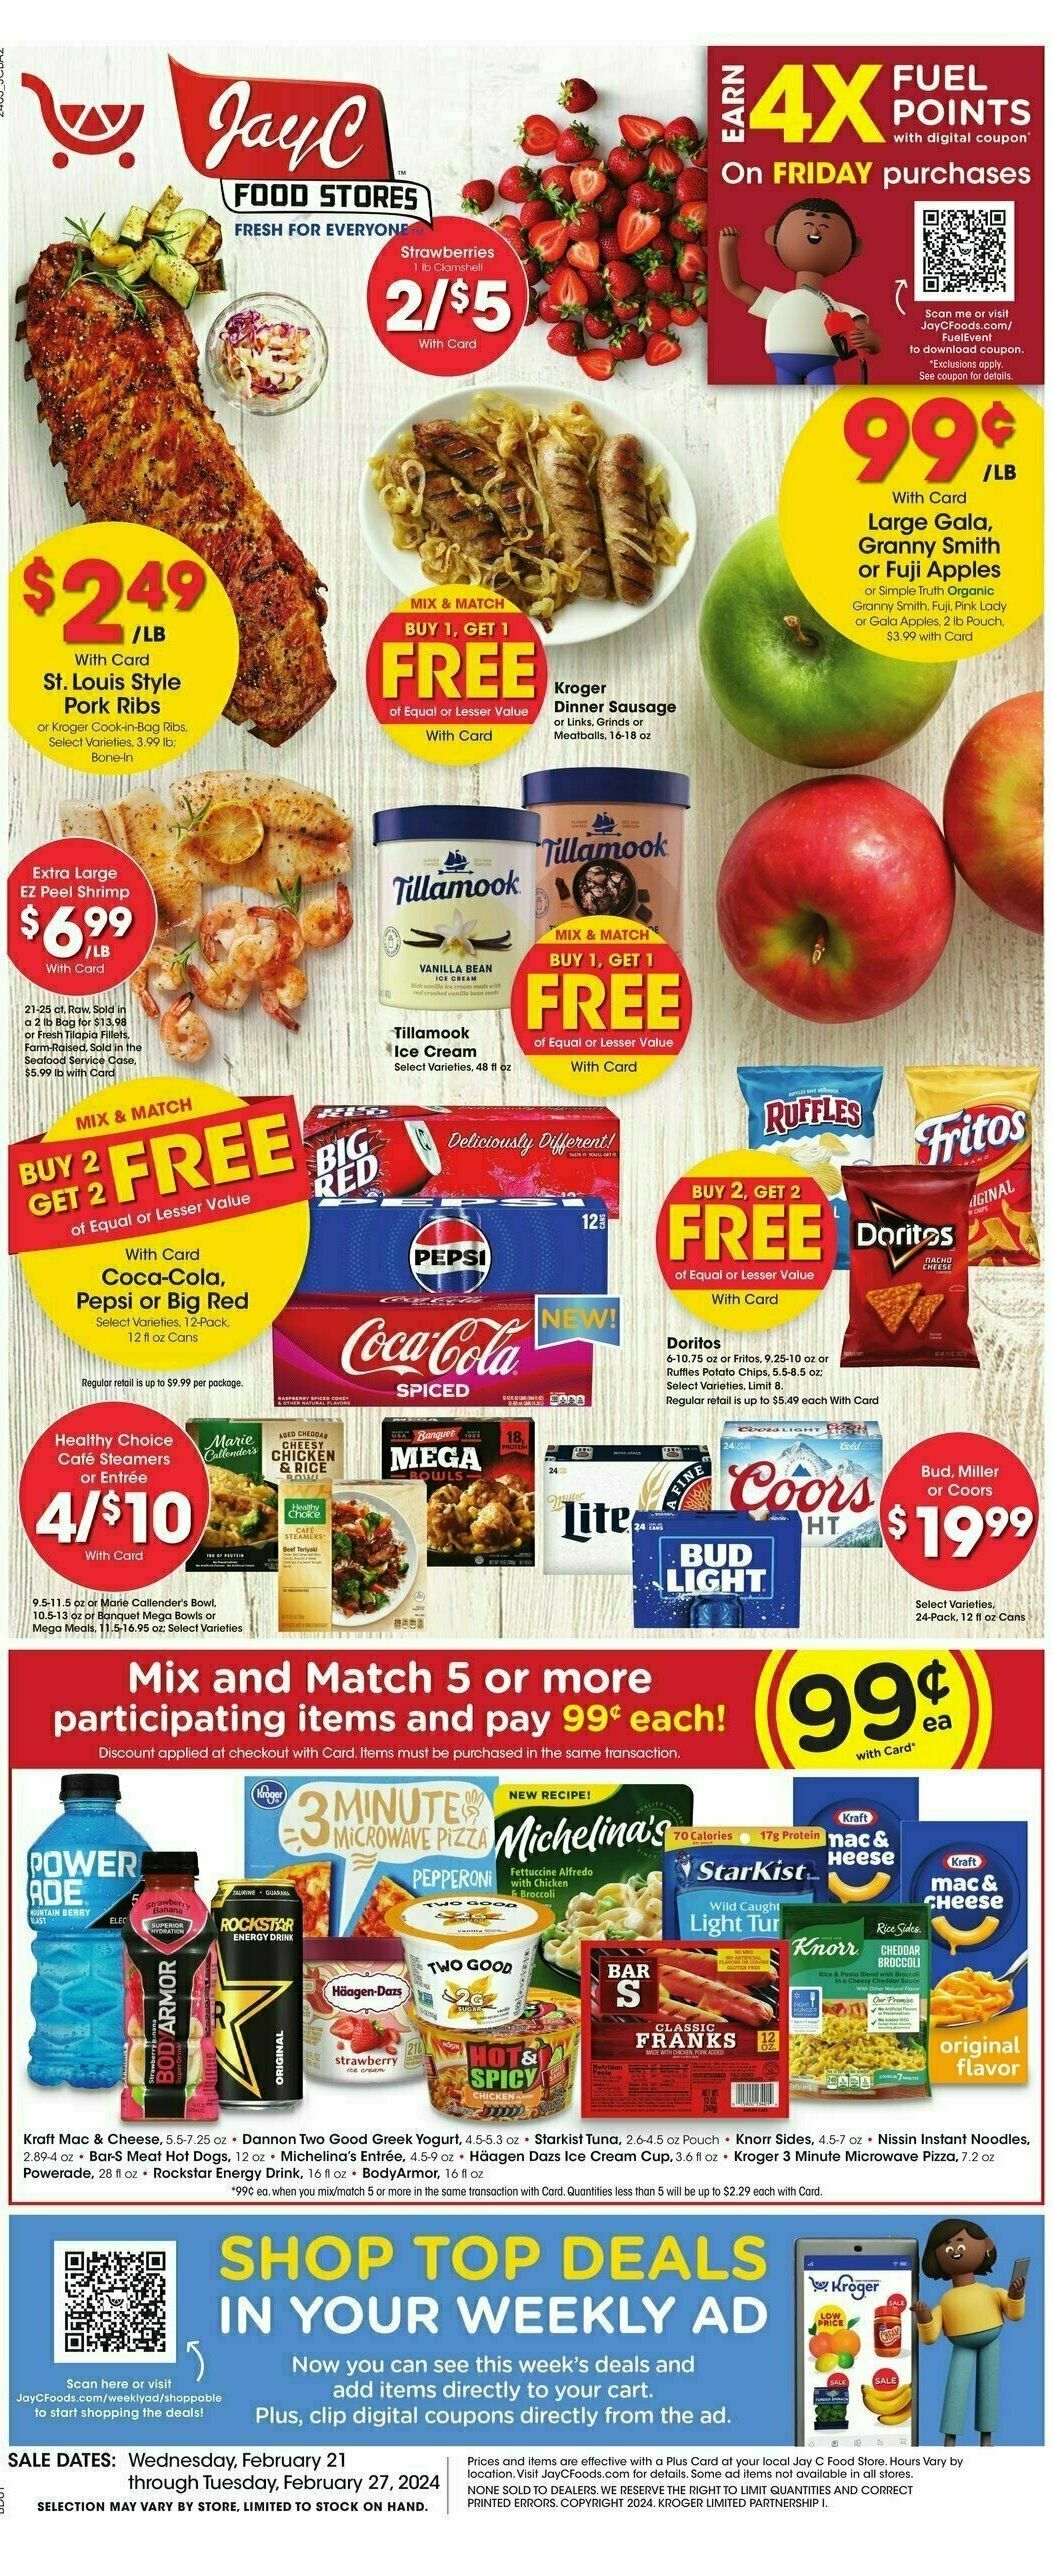 Jay C Food Weekly Ad from February 21